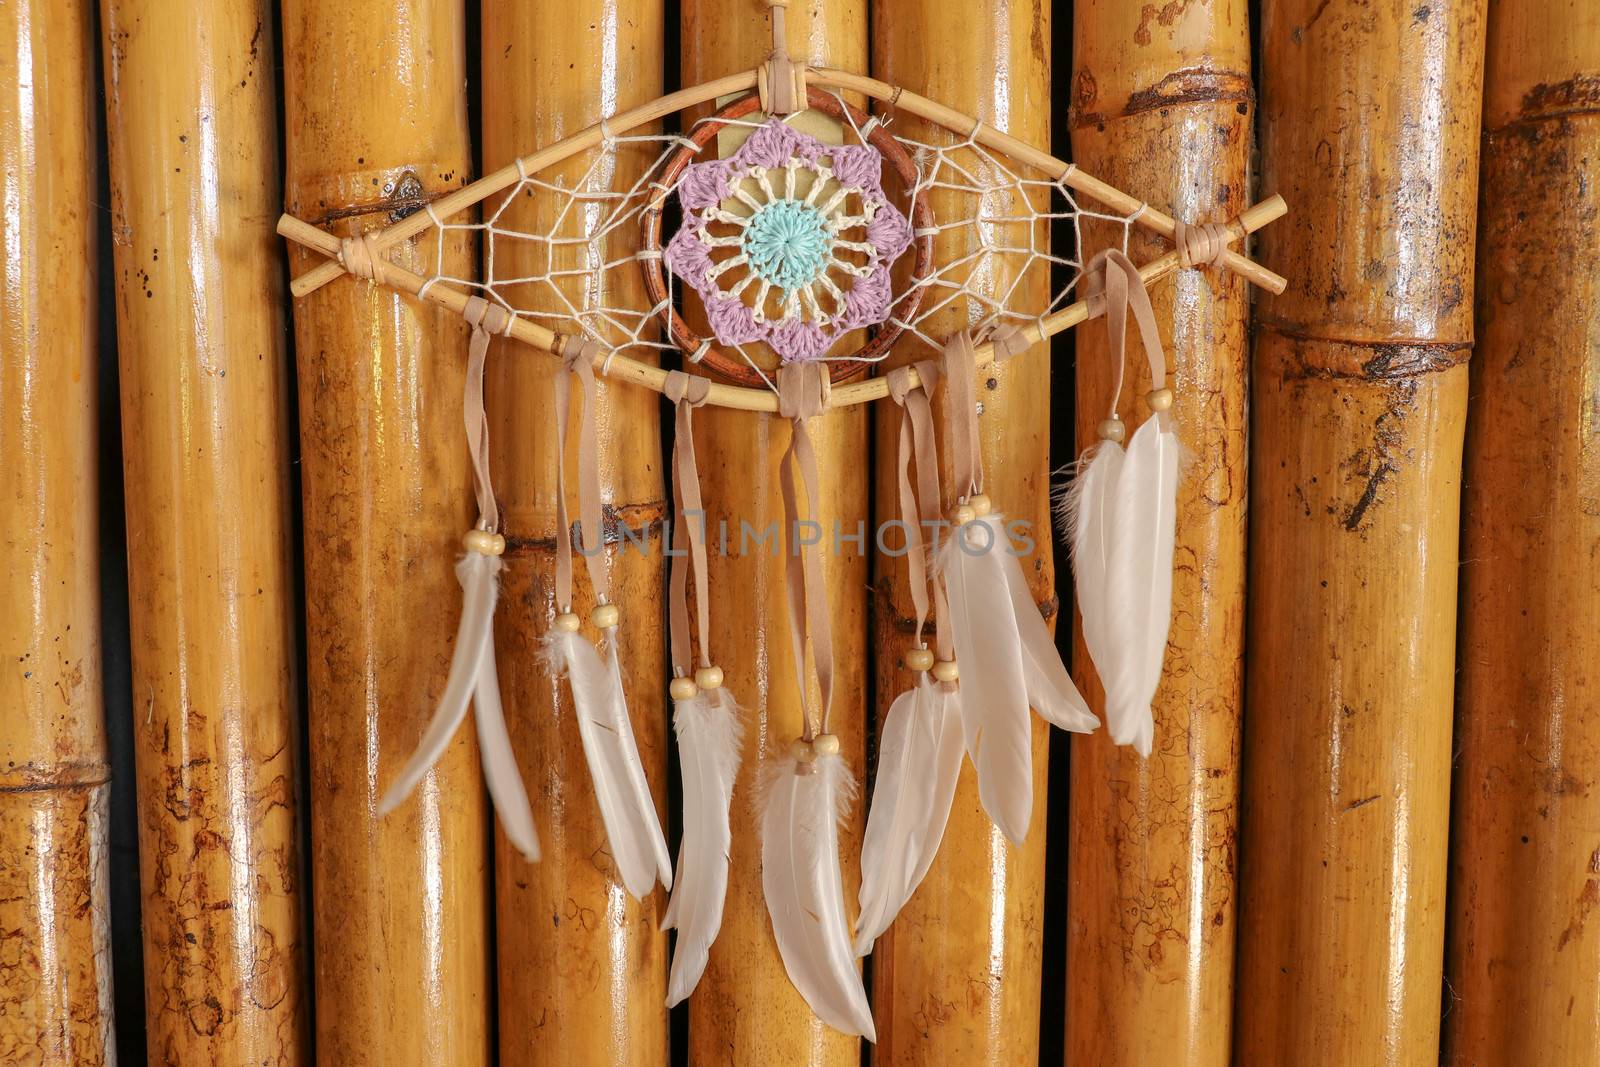 god eye of providence dreamcatcher with white feathers on a wodden background.